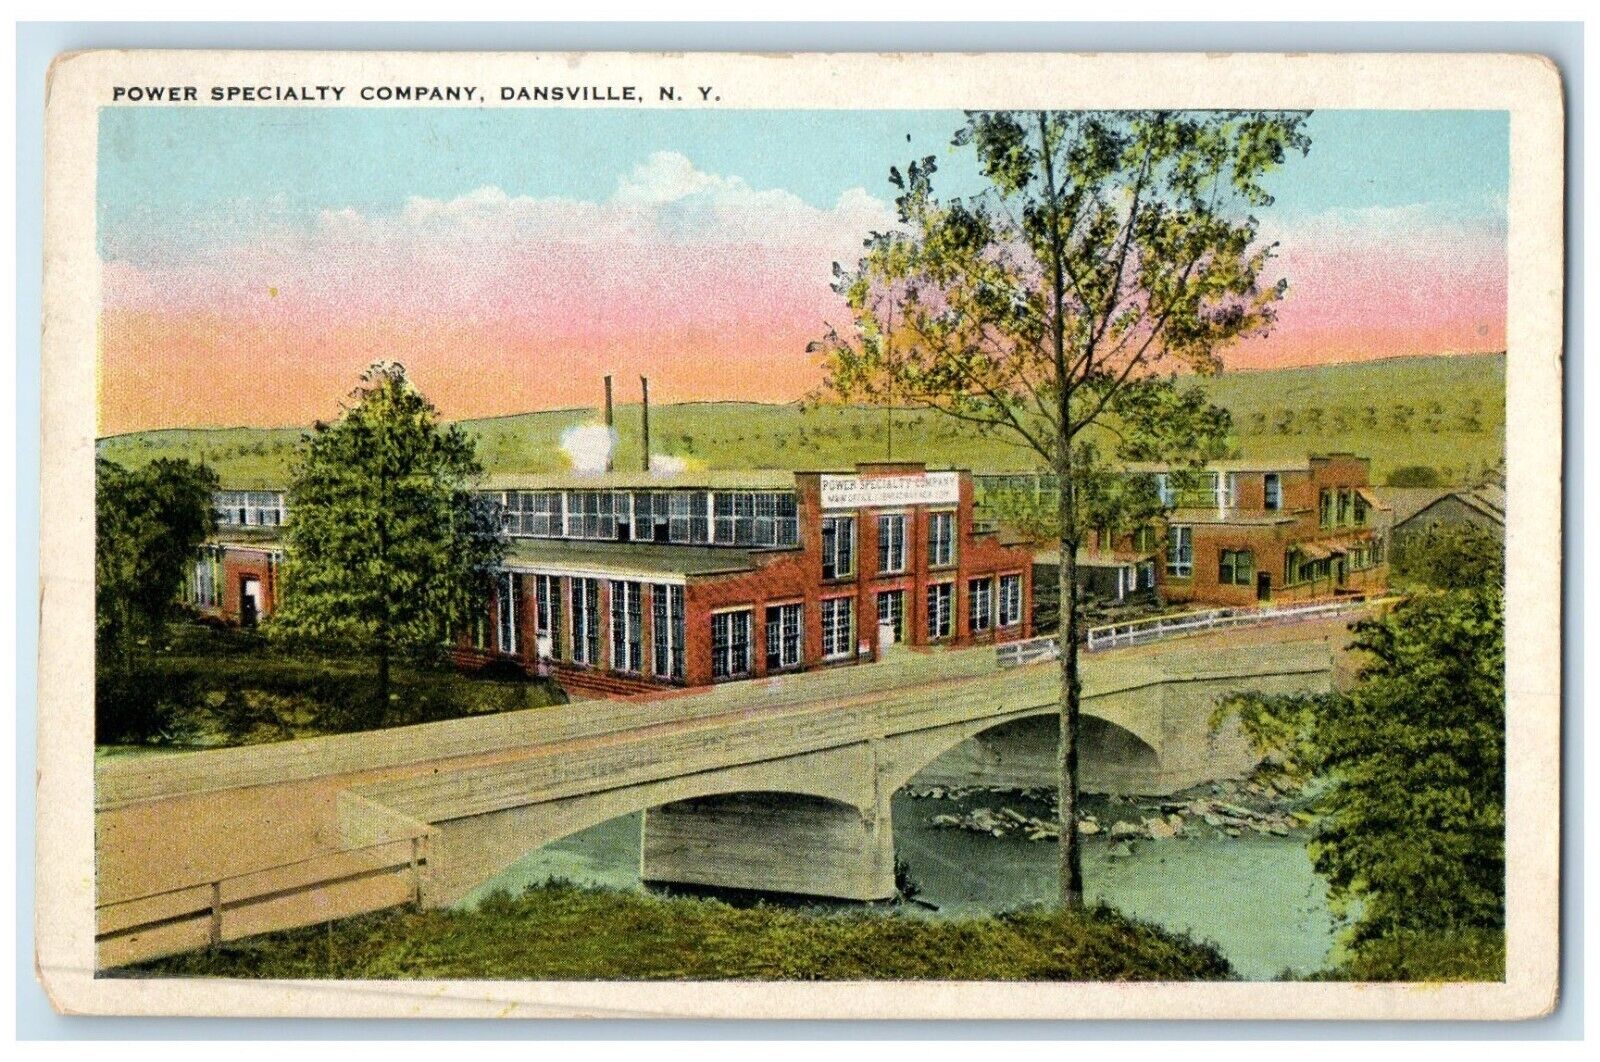 1928 Power Specialty Company Exterior Building Road Dansville New York Postcard